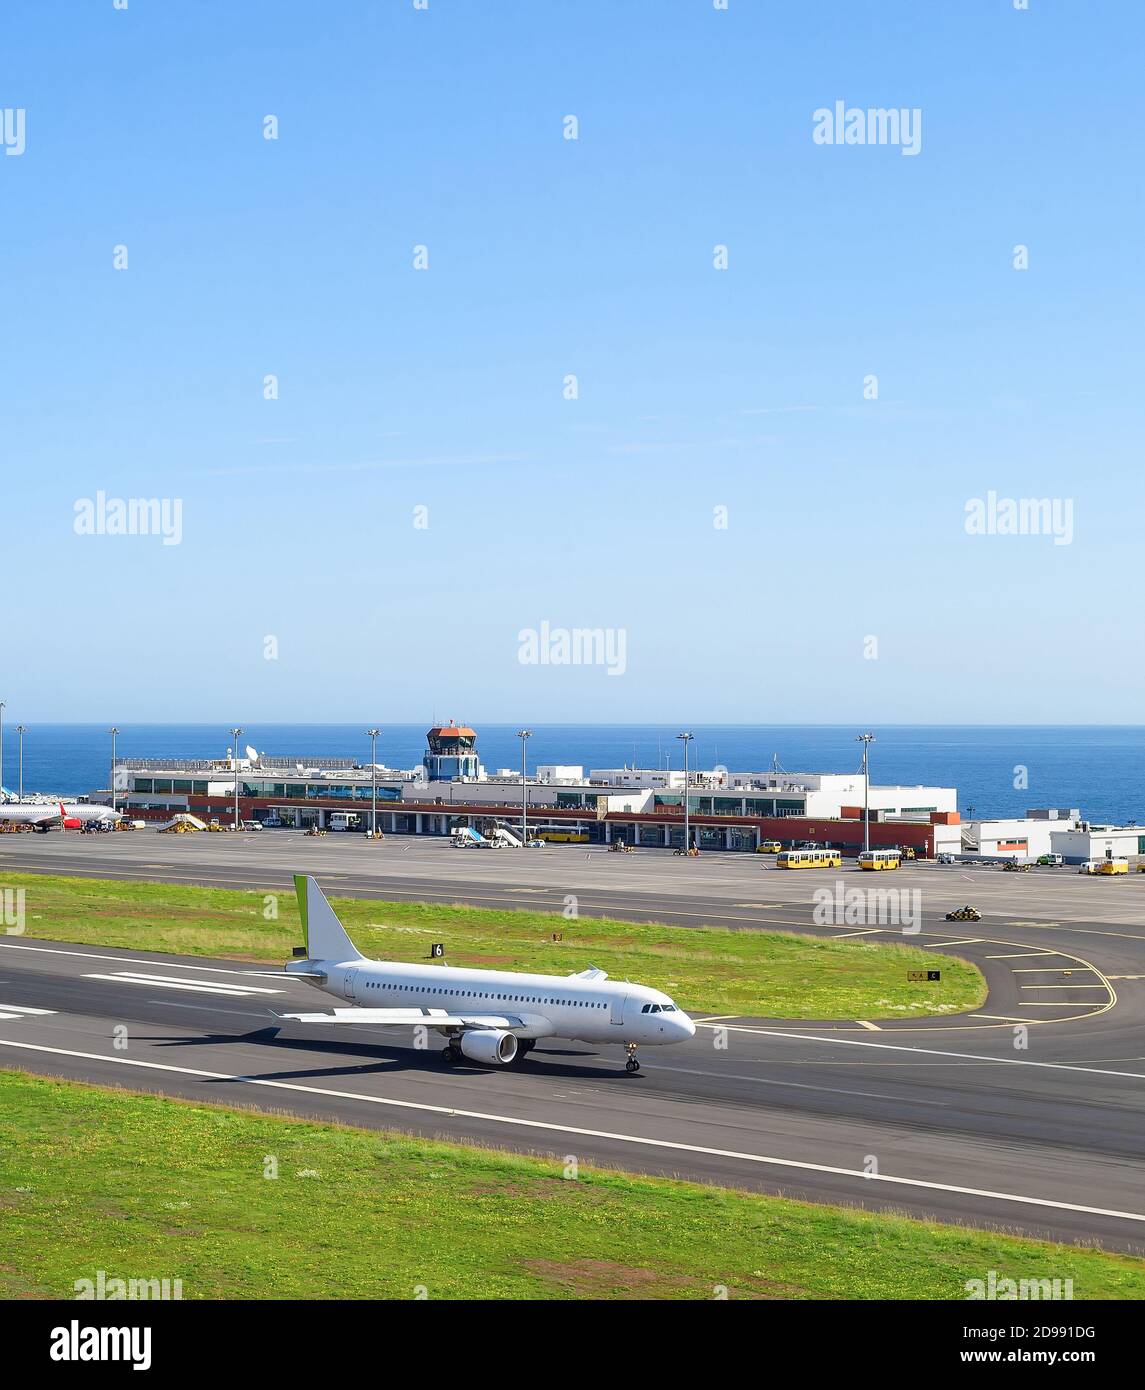 Airplane at runway, airport terminal in background, seascape, Madeira, Portugal Stock Photo